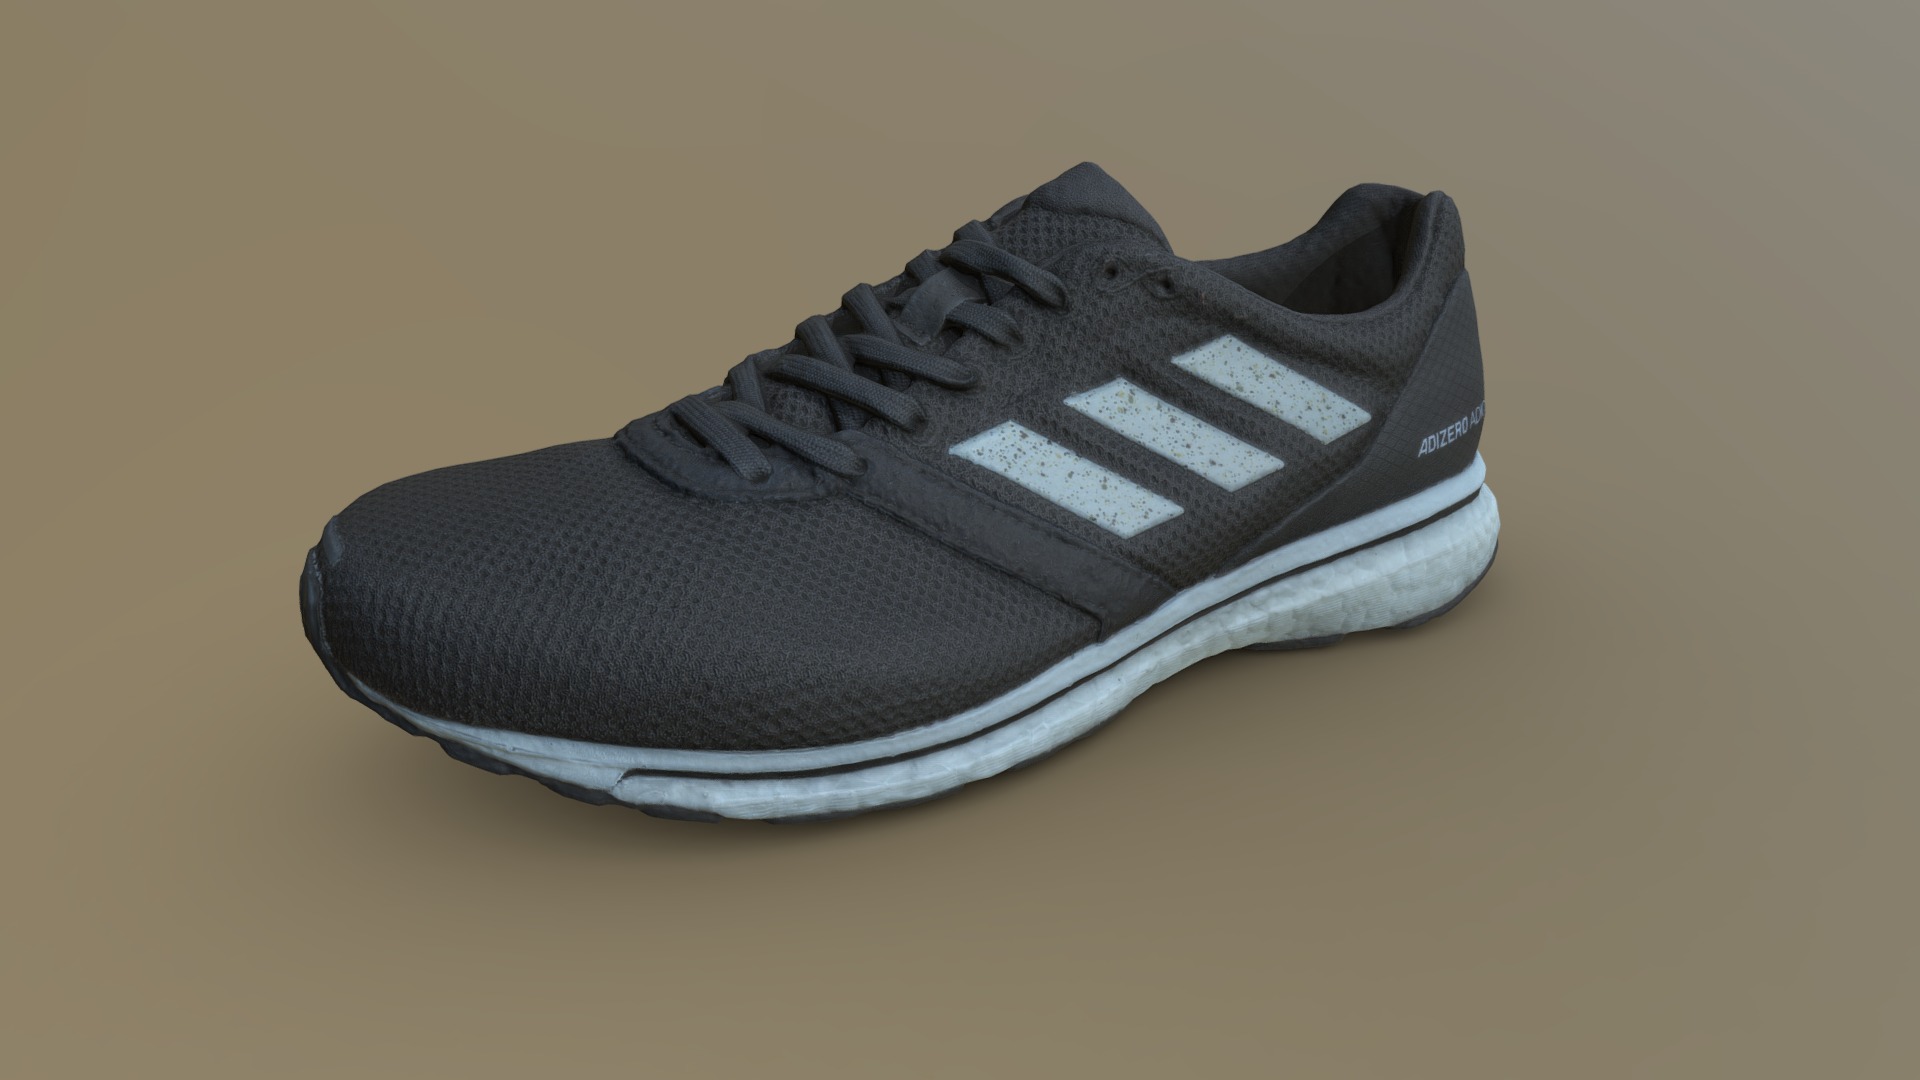 3D model Adidas Adizero Adios 4 - This is a 3D model of the Adidas Adizero Adios 4. The 3D model is about a black and white shoe.